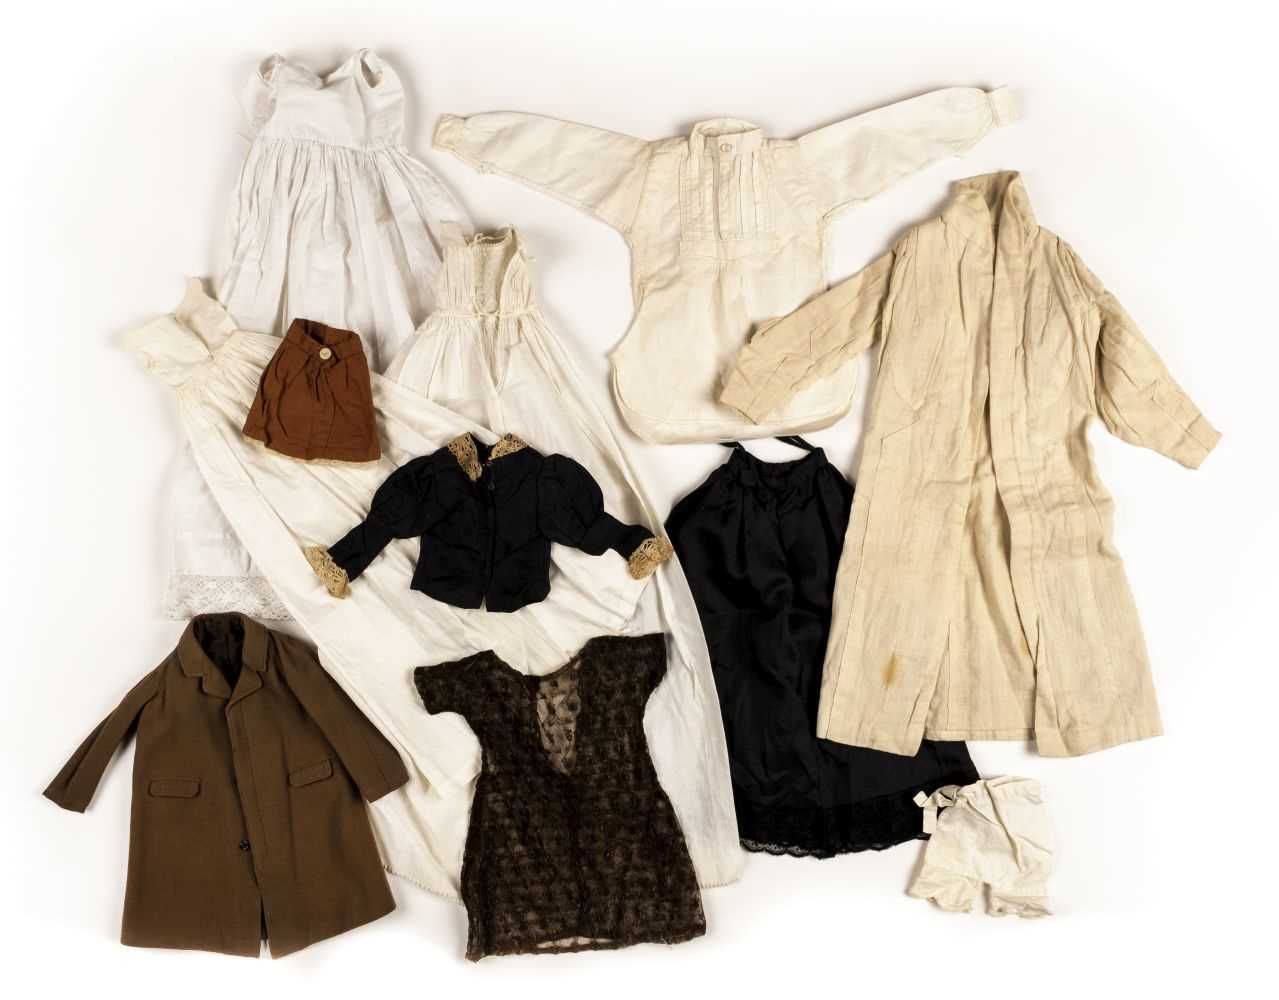 Lot 174 - Miniature clothes. A collection of miniature and dolls' clothes, 19th-20th century